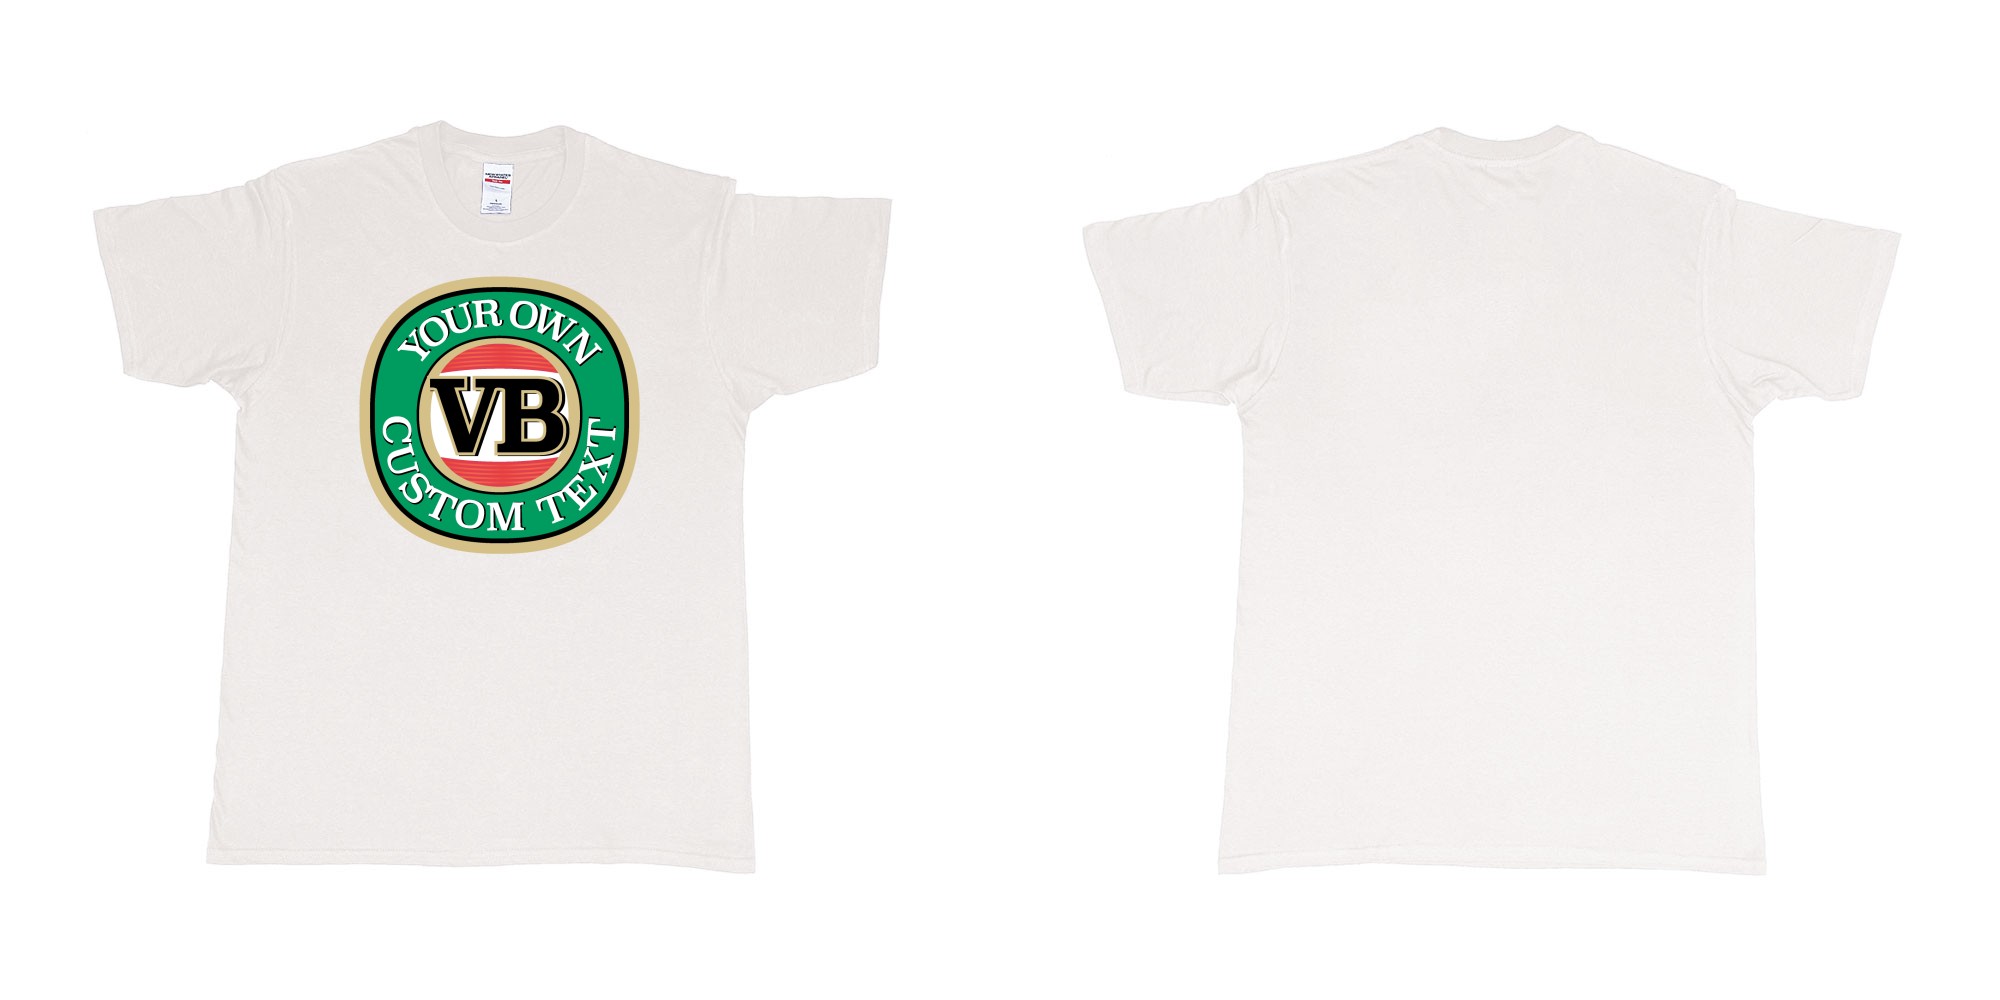 Custom tshirt design vb victoria bitter beer brand logo in fabric color white choice your own text made in Bali by The Pirate Way